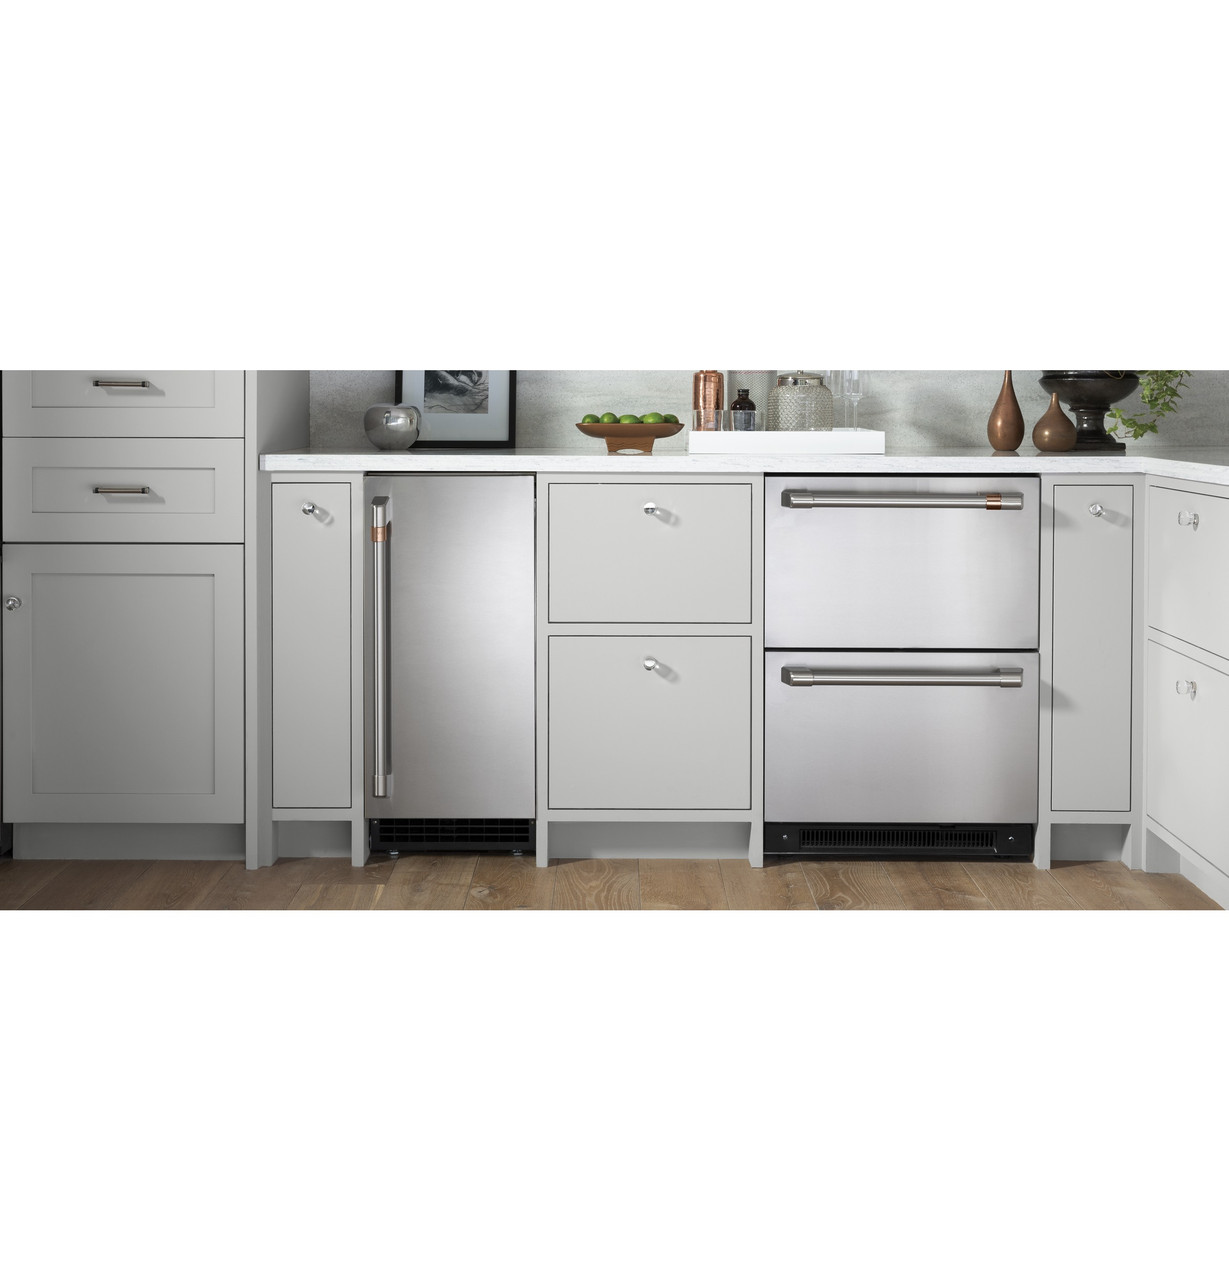 CDE06RP3ND1 by Cafe - Café™ 5.7 Cu. Ft. Built-In Dual-Drawer Refrigerator